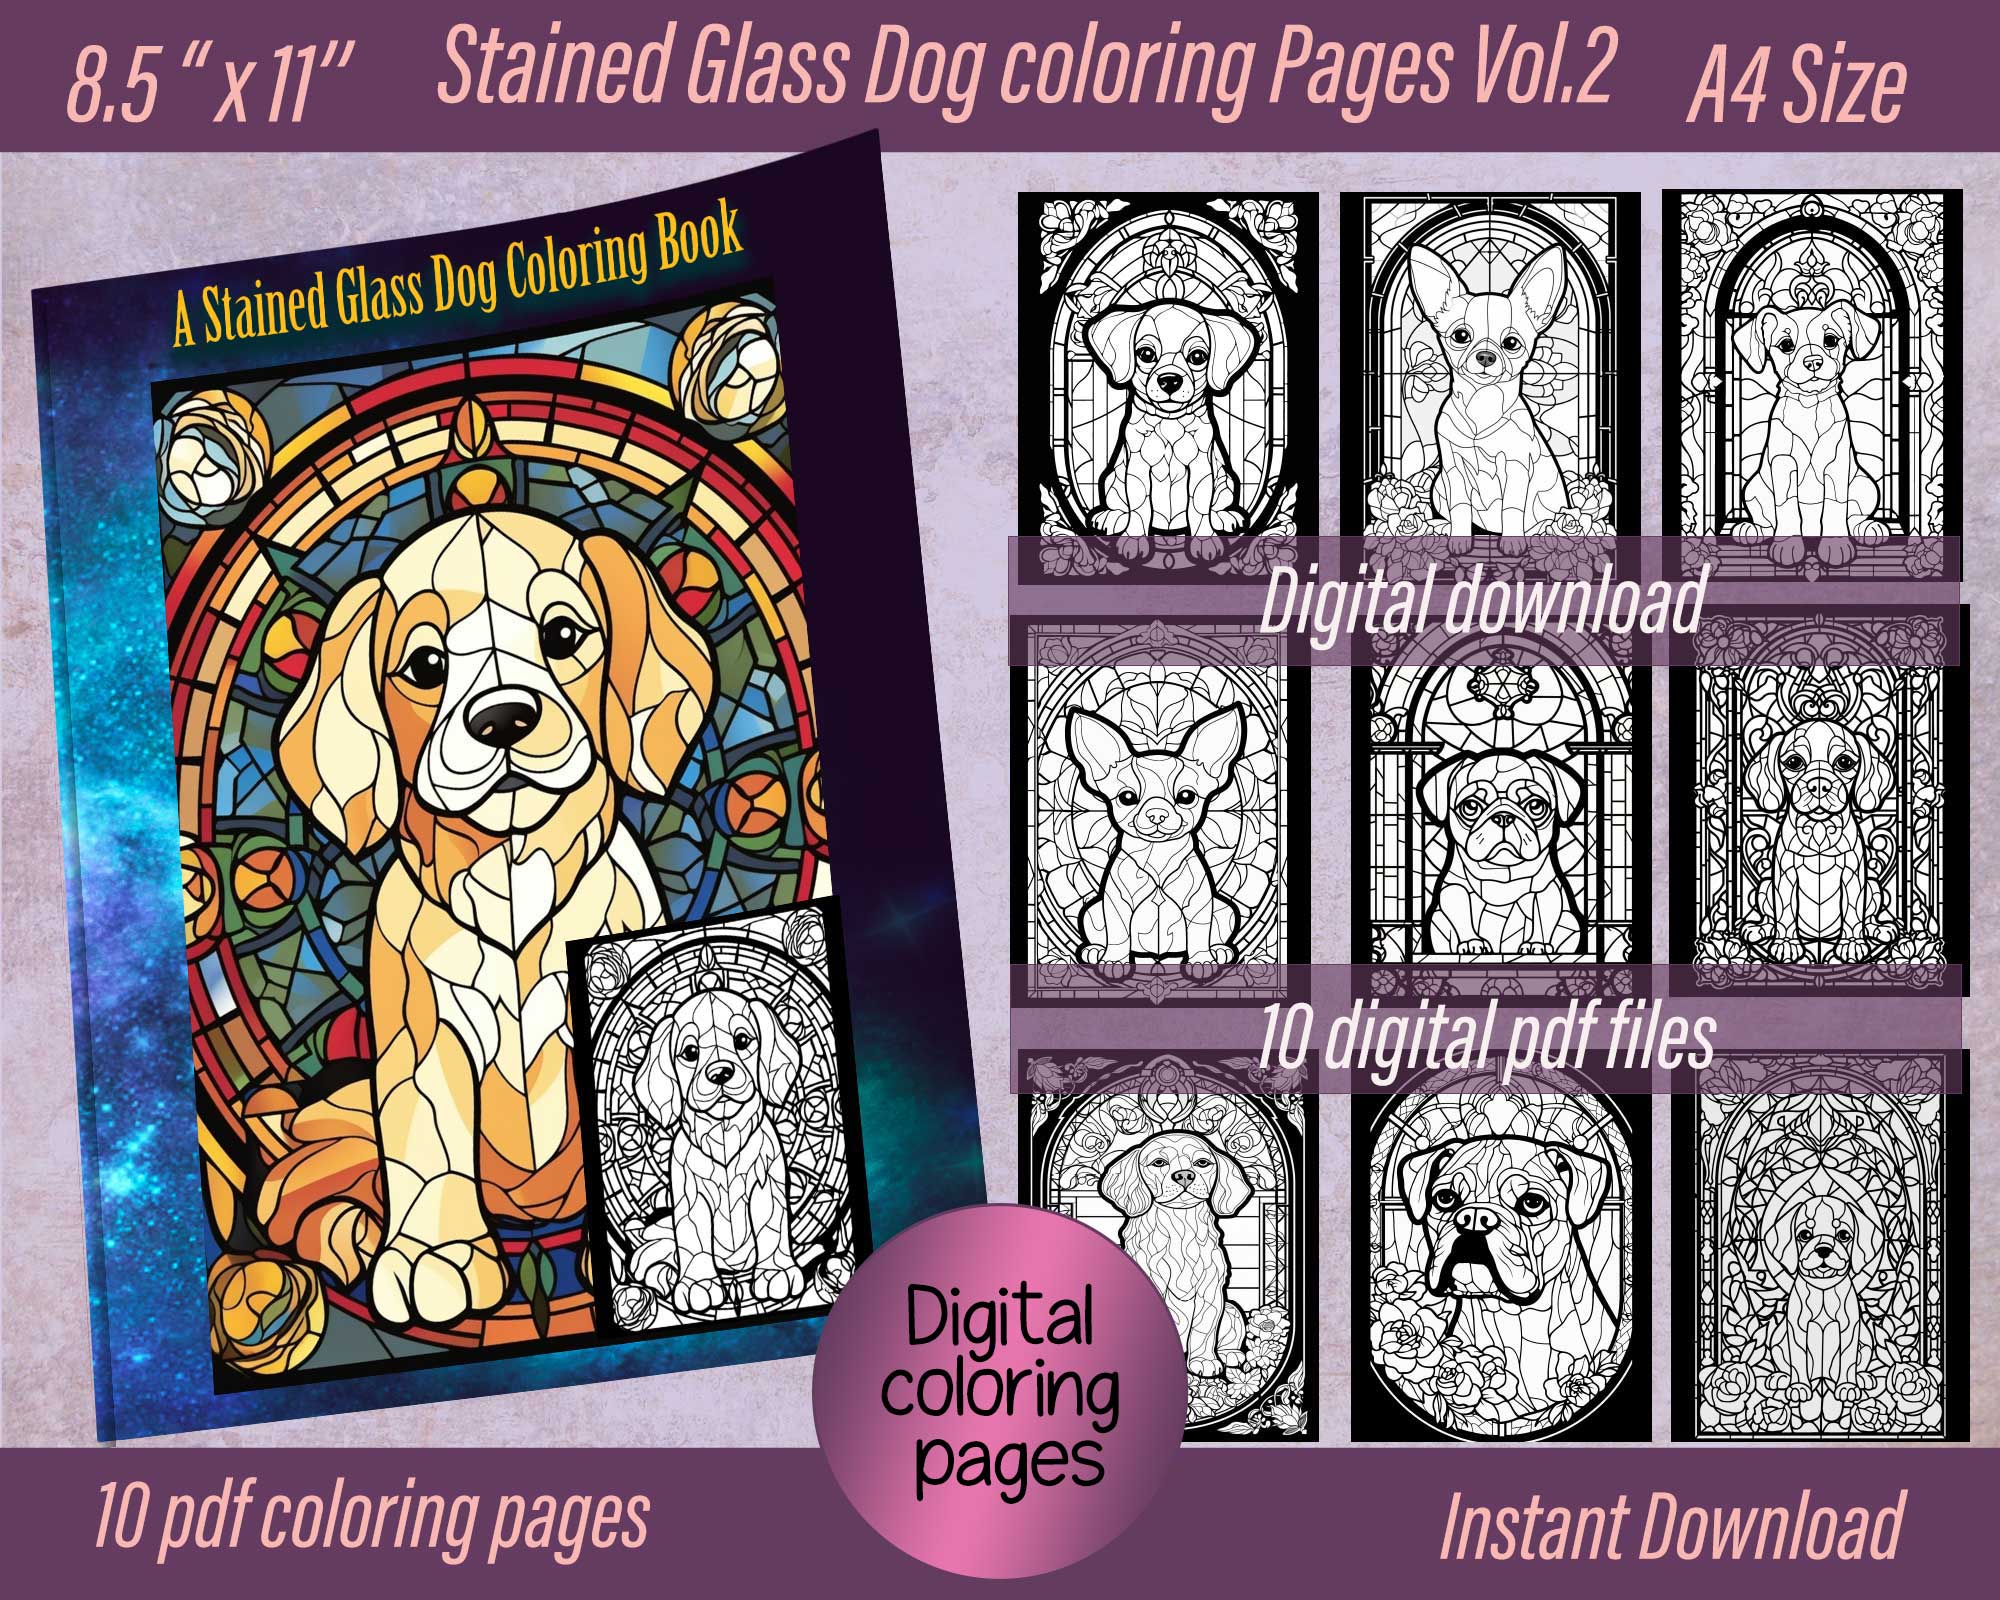 Stained glass dog coloring pages vol digital pdf file